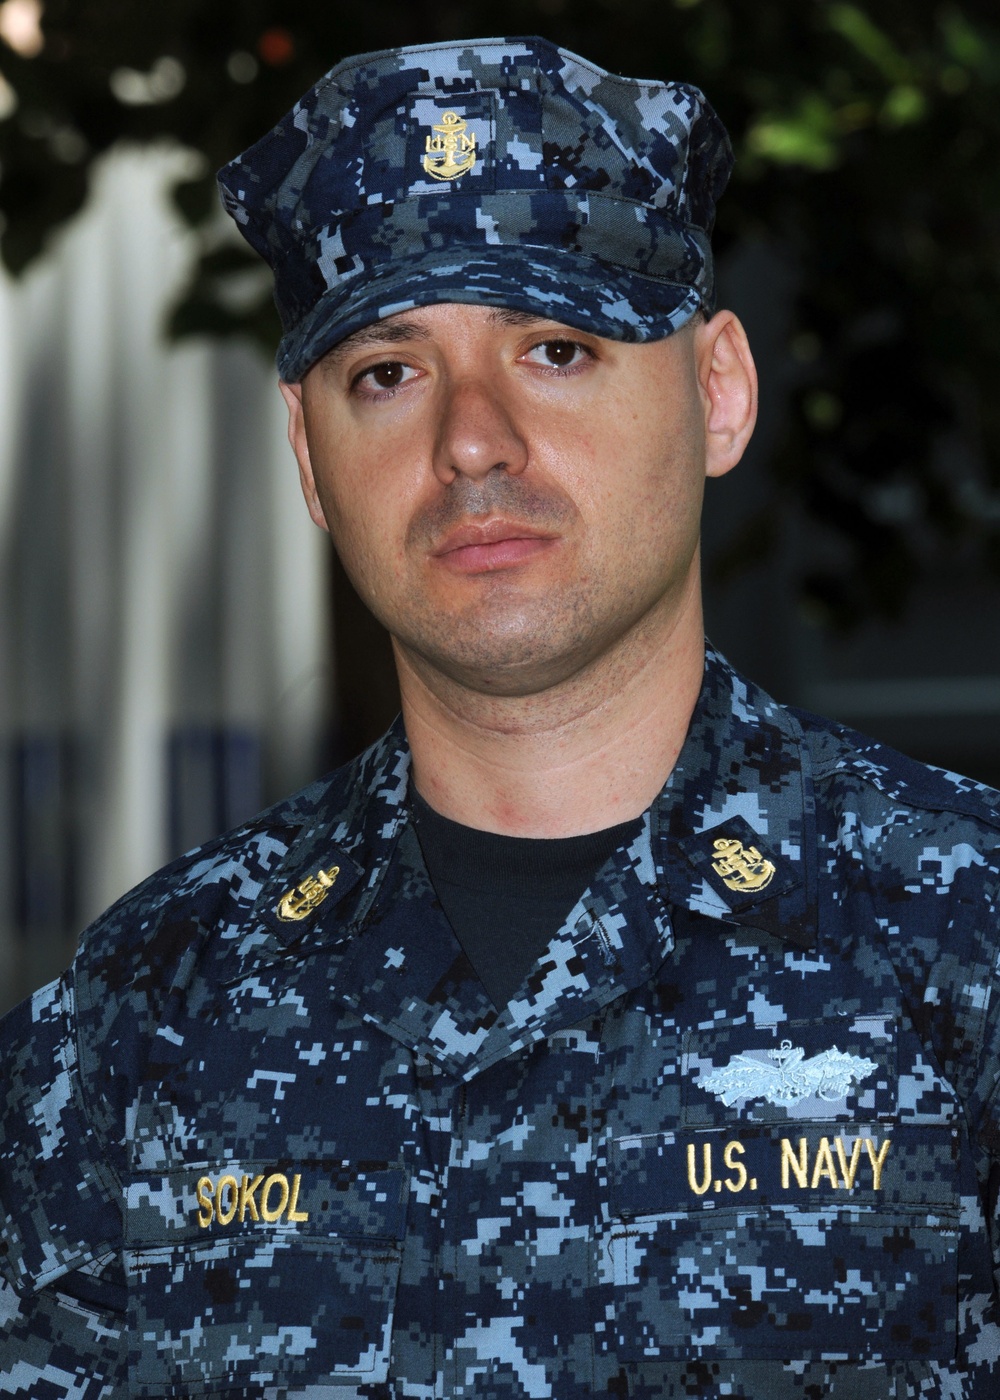 Navy Chief Returns to Home Land After 17 Years to Support Exercise Sea Breeze 2010